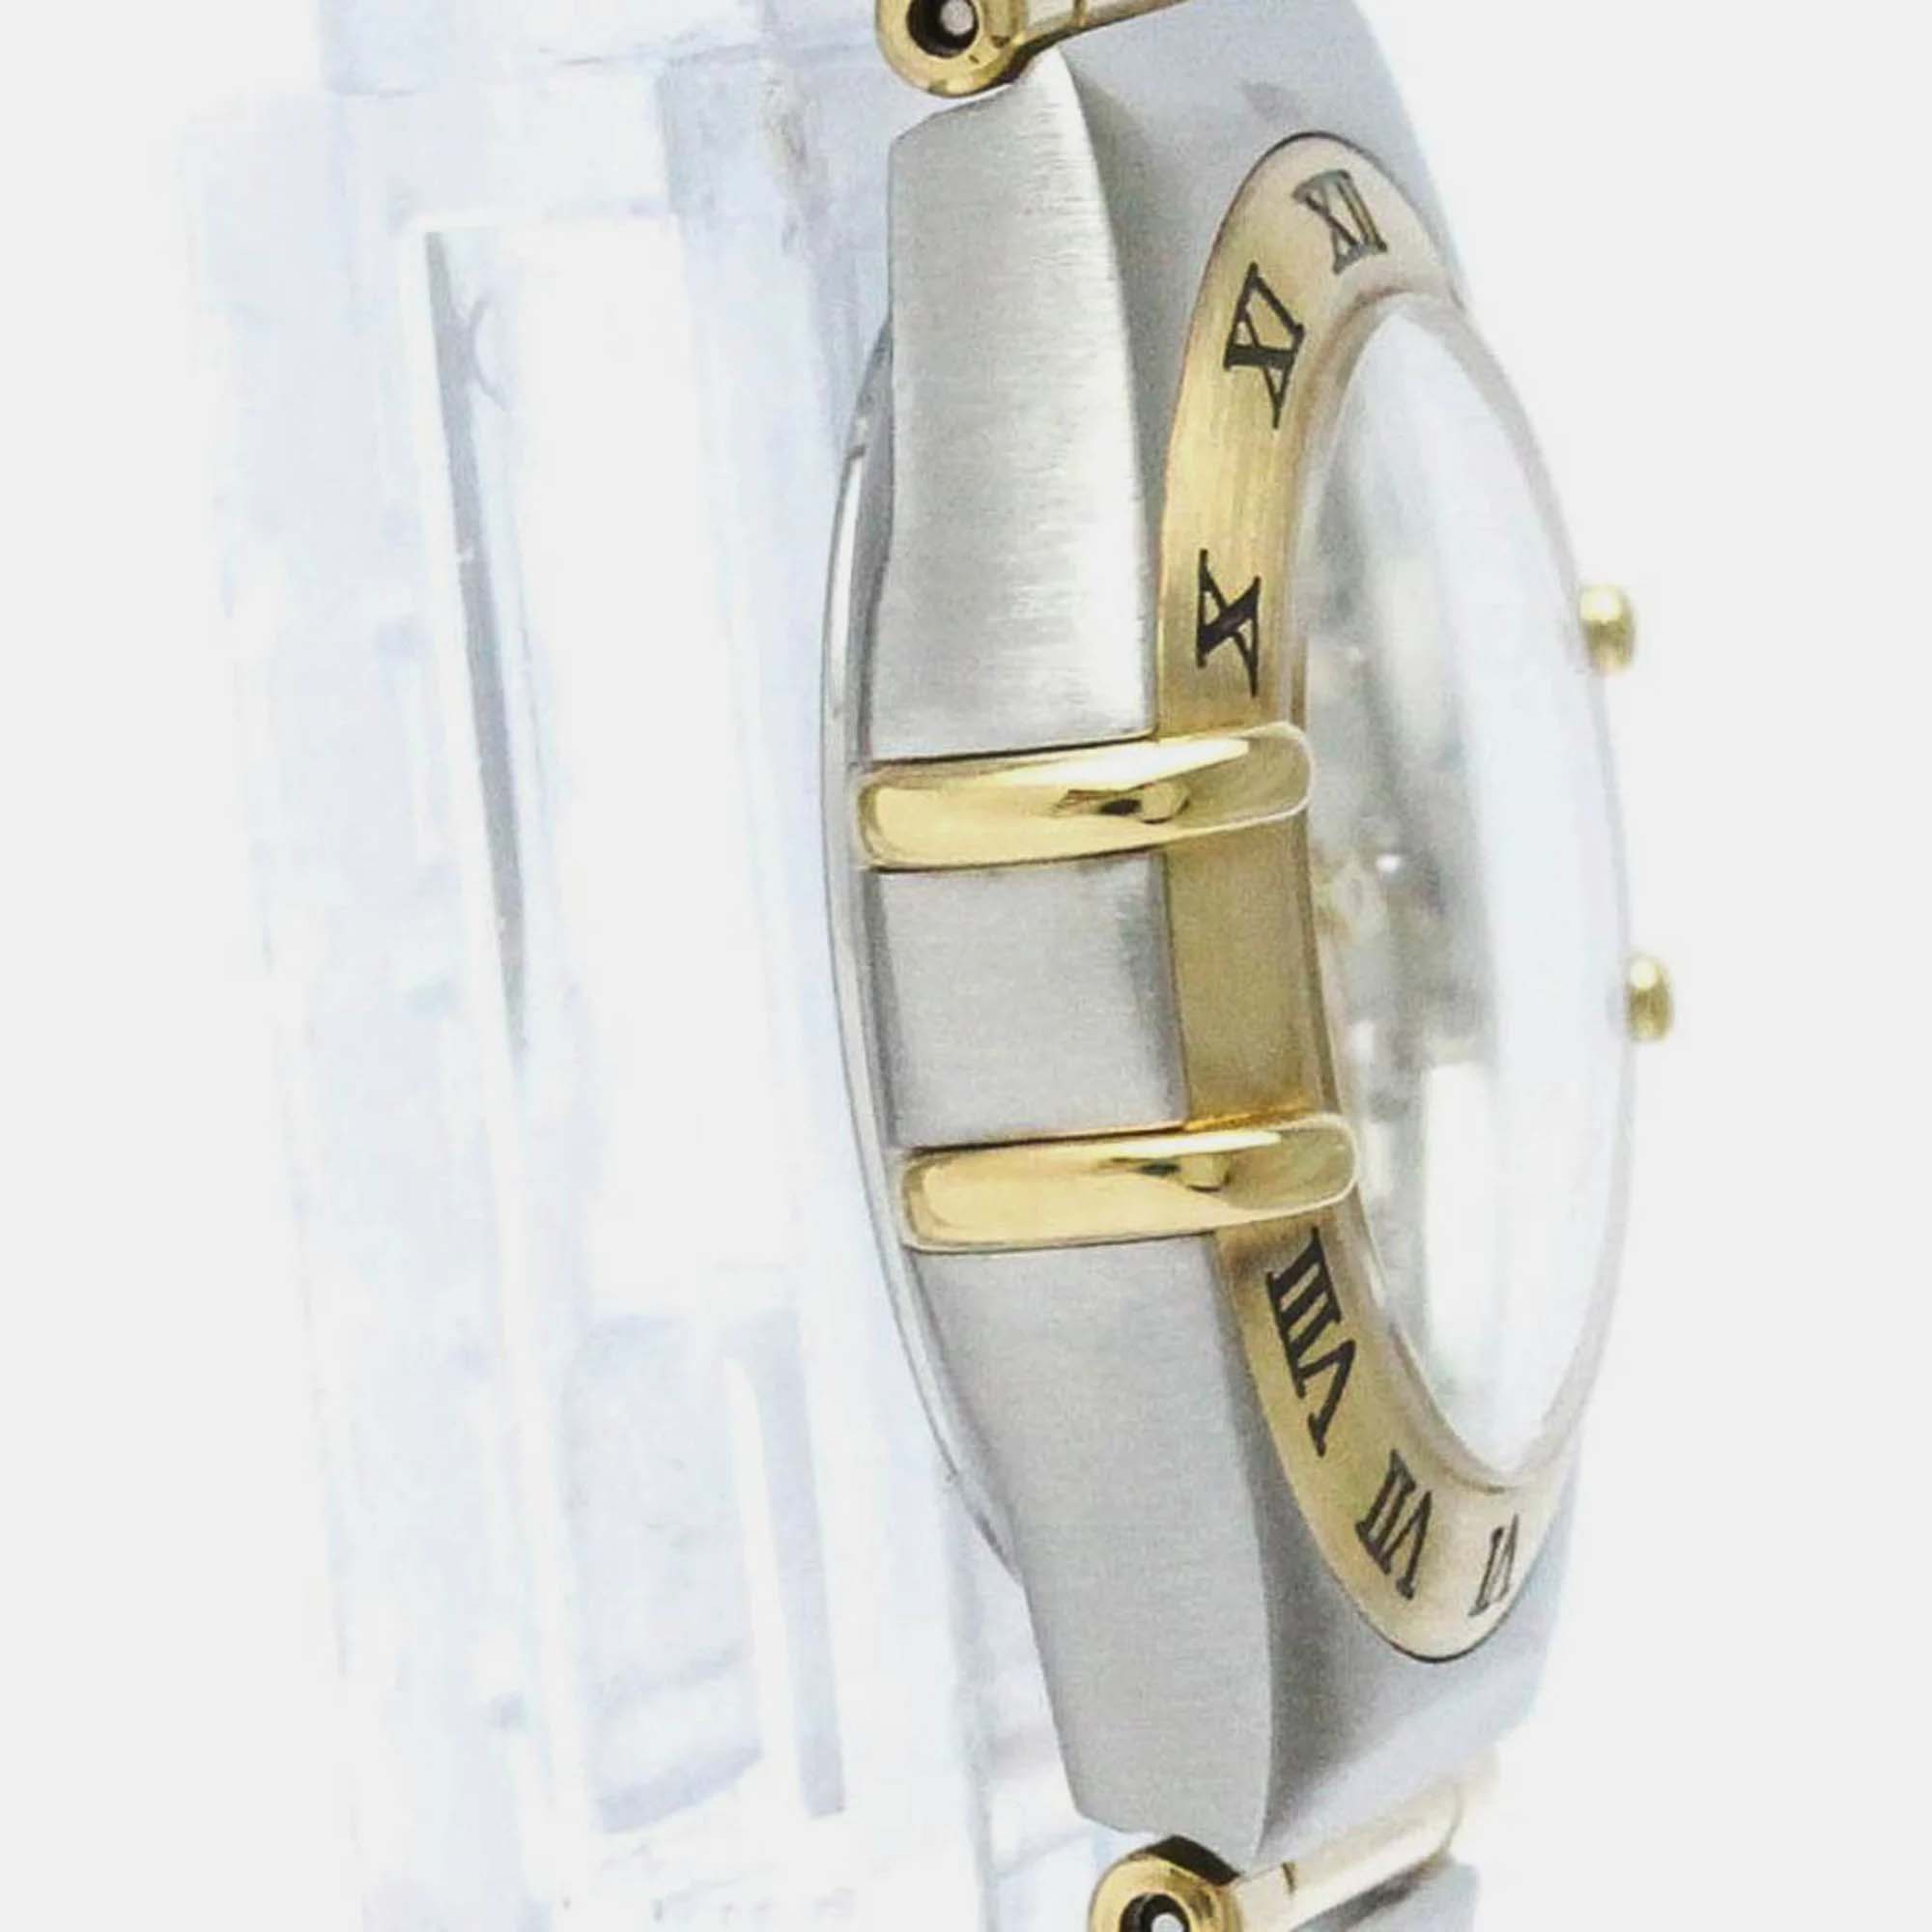 Omega White Shell Diamond 18k Yellow Gold And Stainless Steel Constellation Quartz Women's Wristwatch 22 Mm